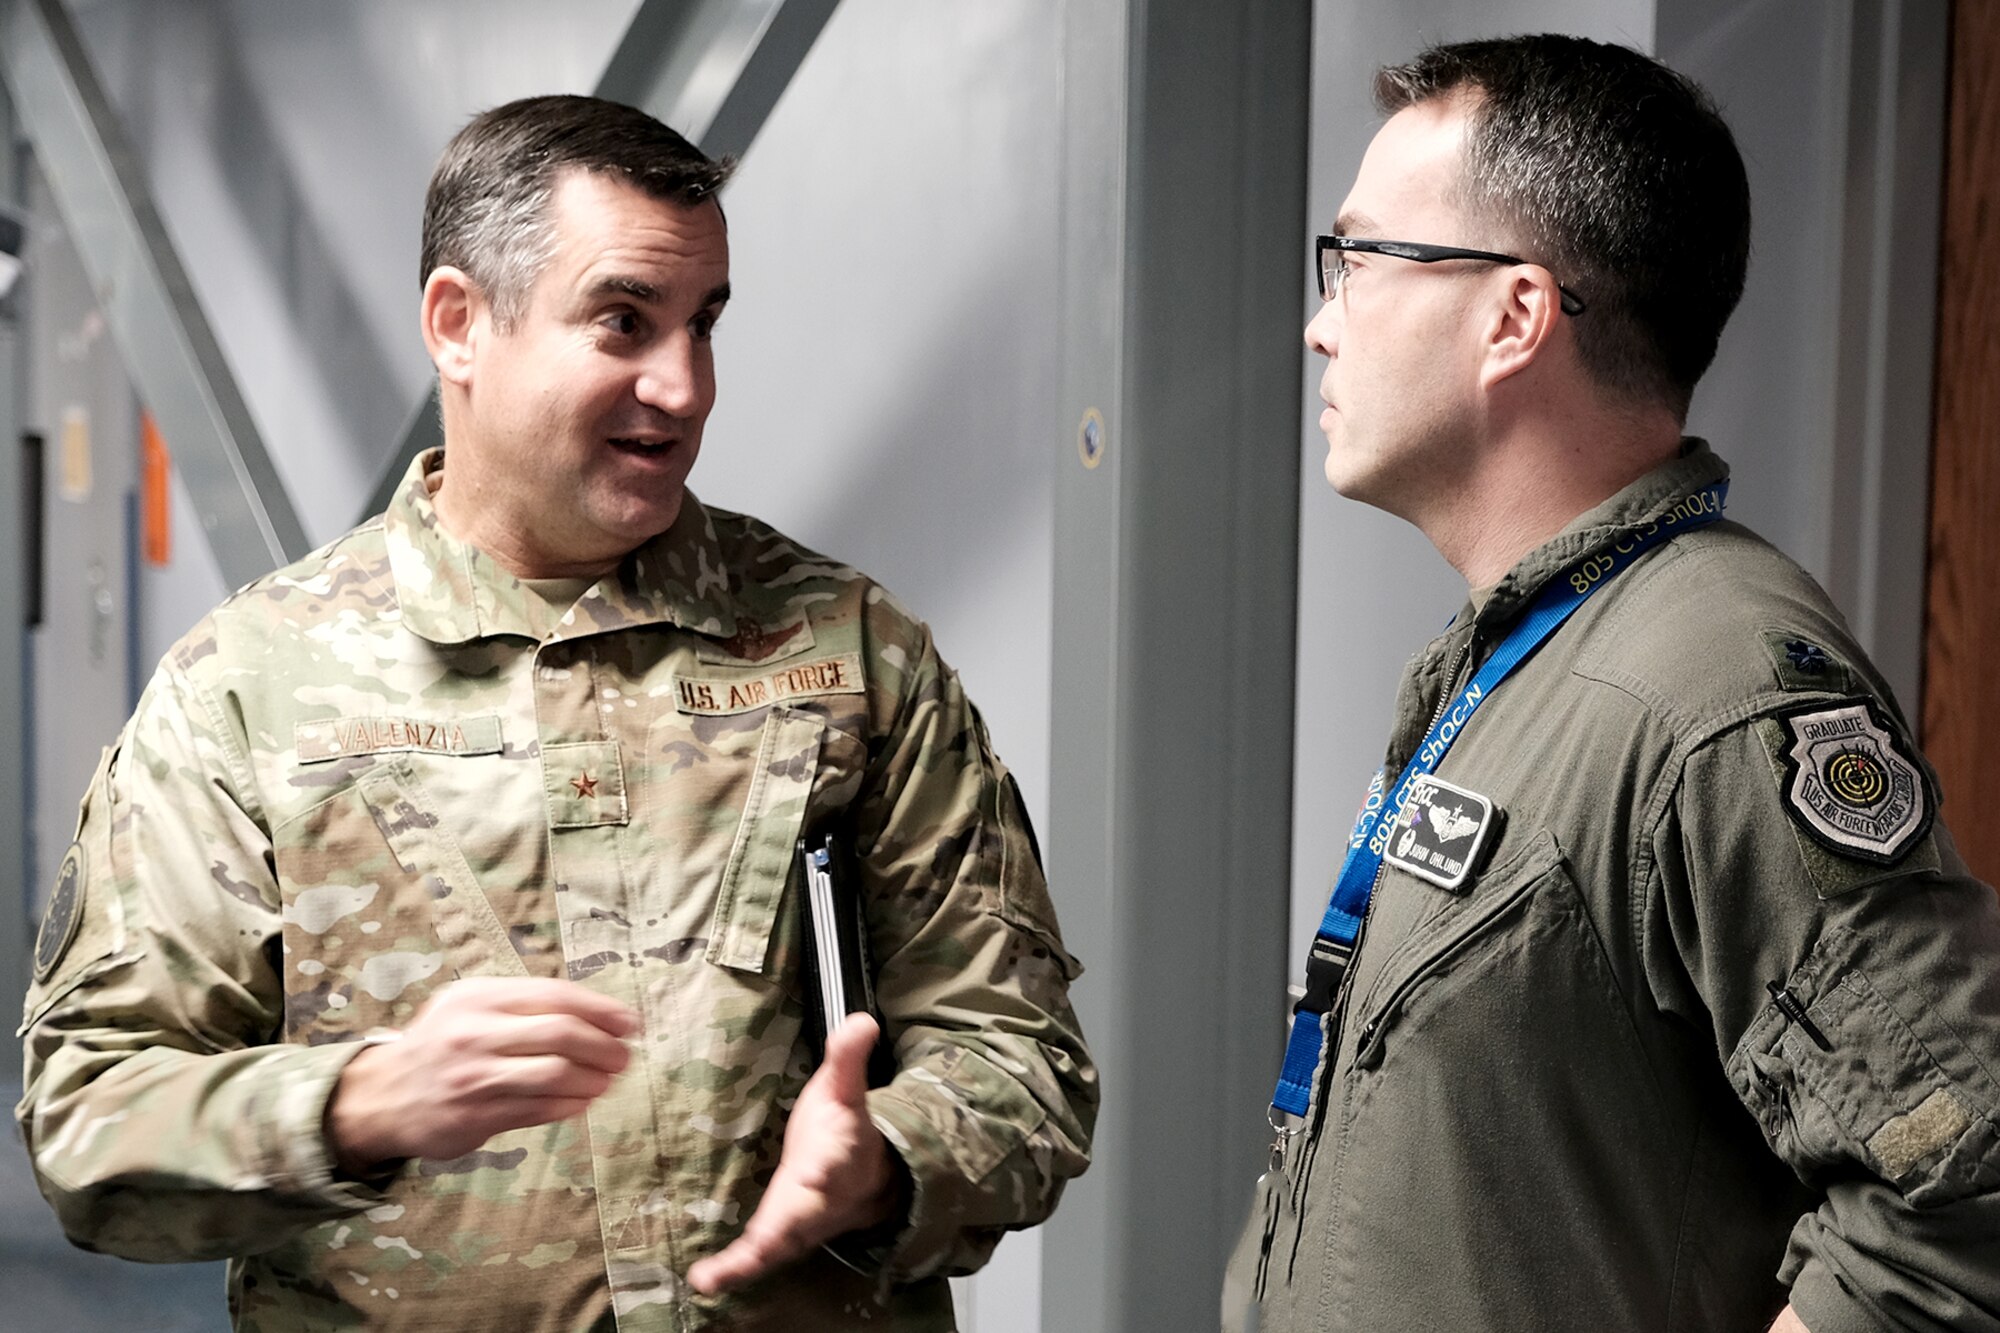 photo of U.S. Air Force military member briefs general while others work on computers around them